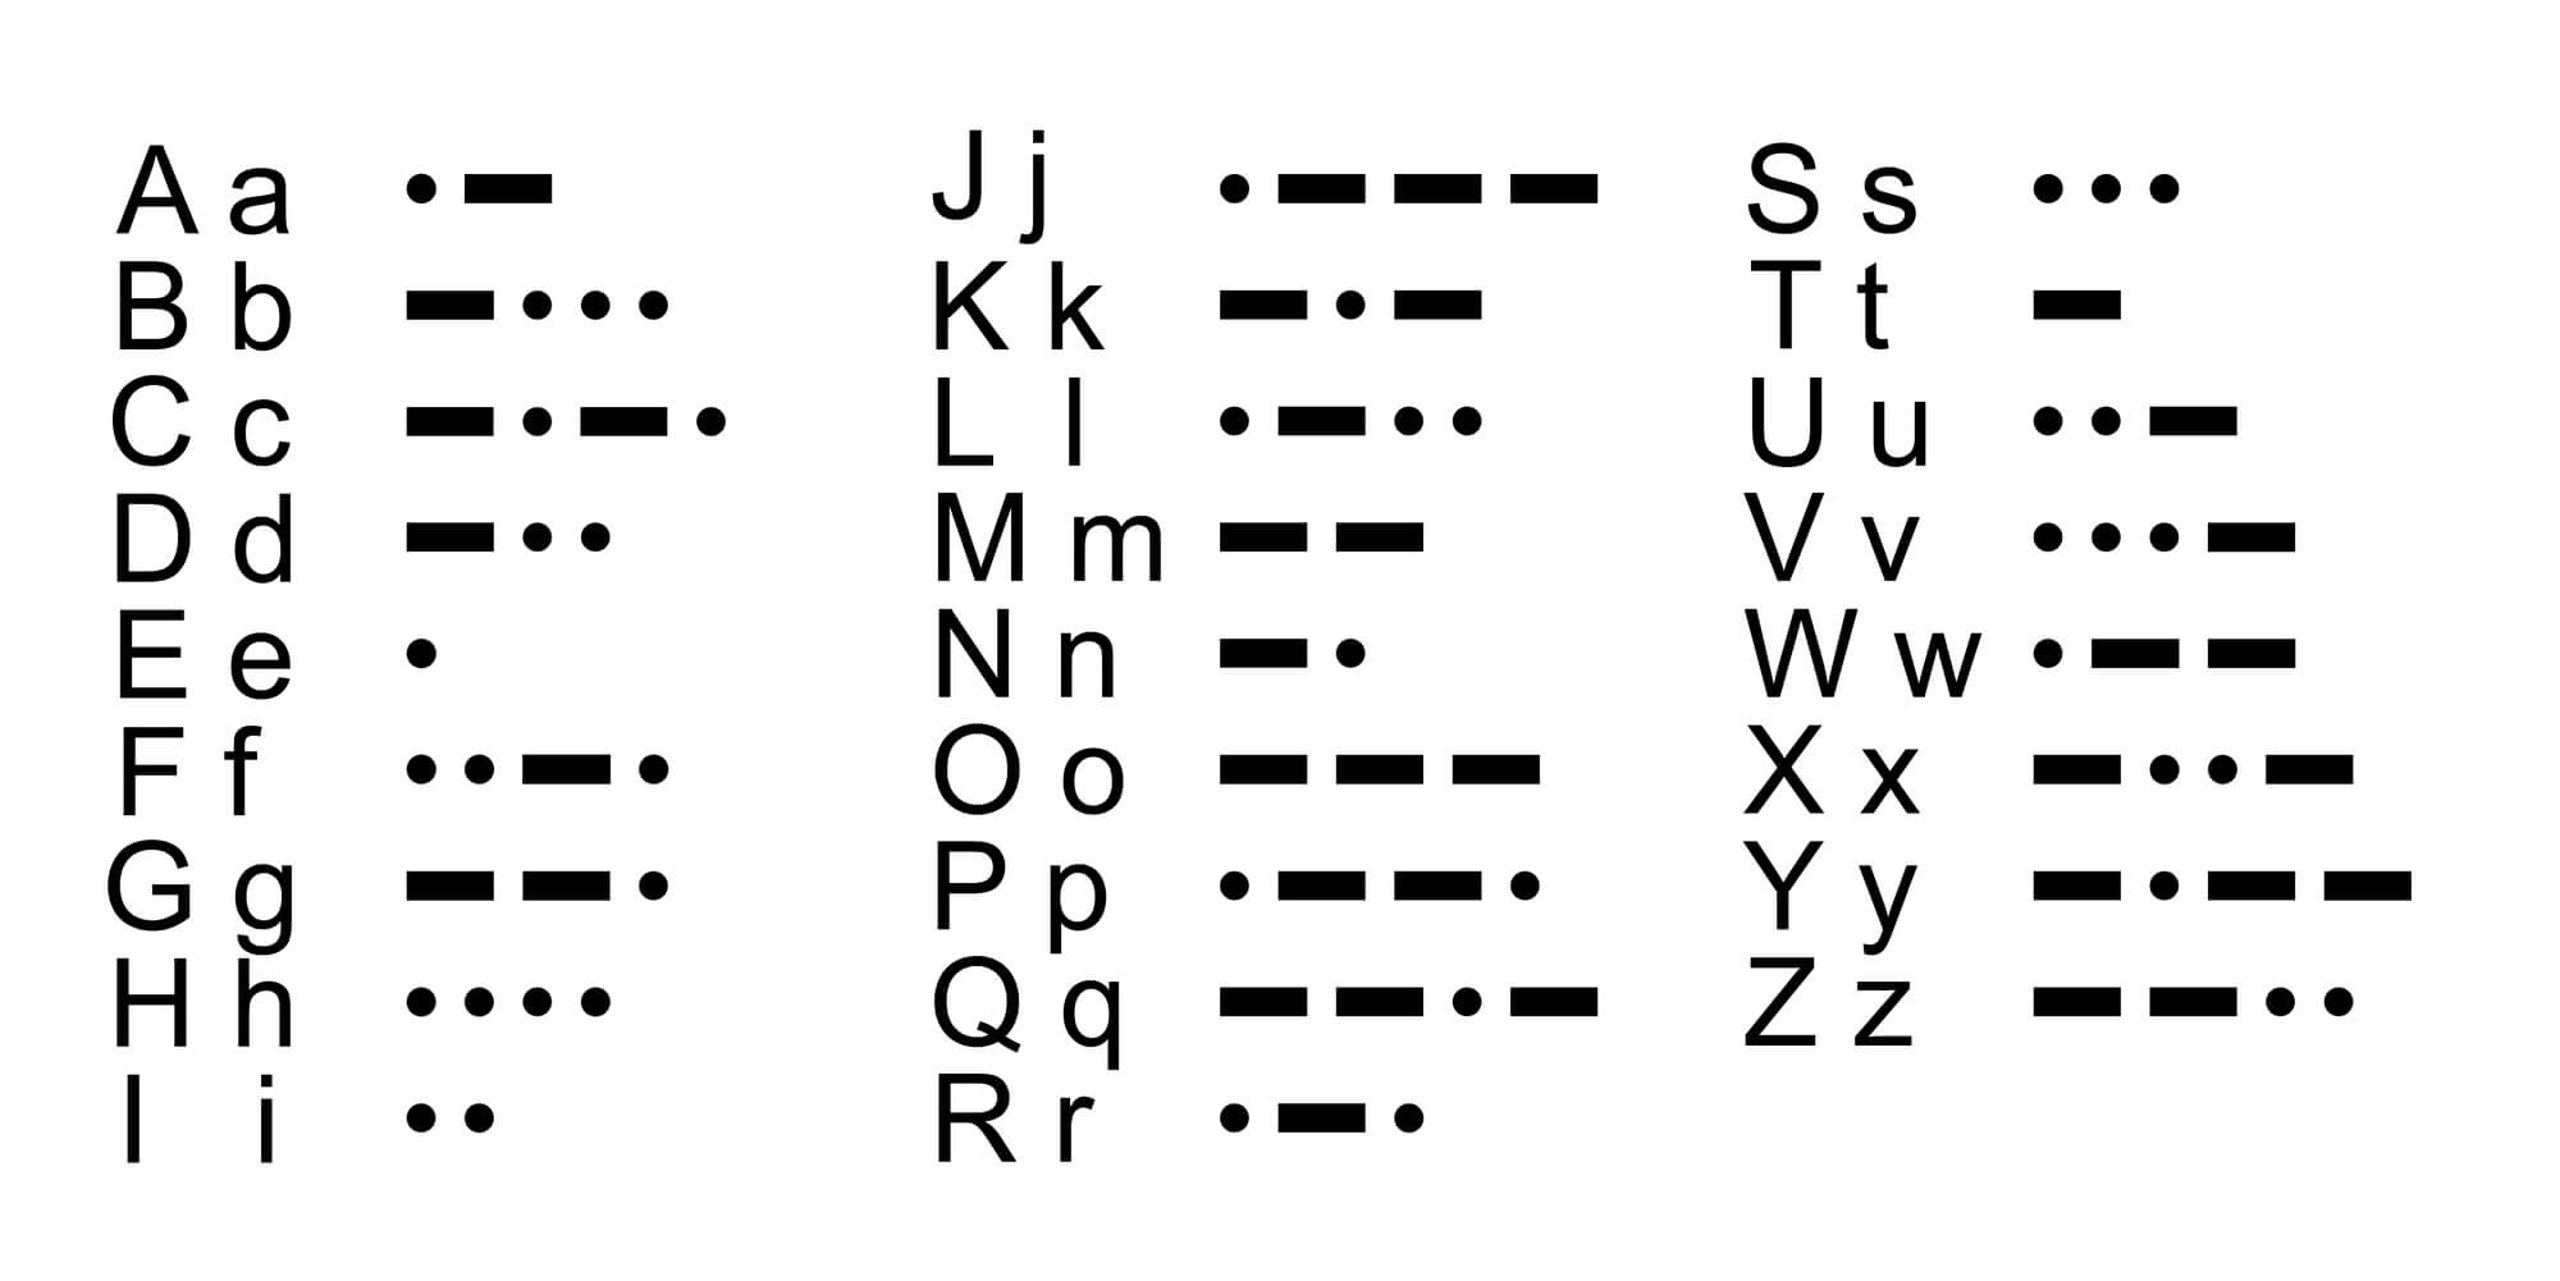 Learn Your Name In Morse Code Day (11th January) – Days Of The Year